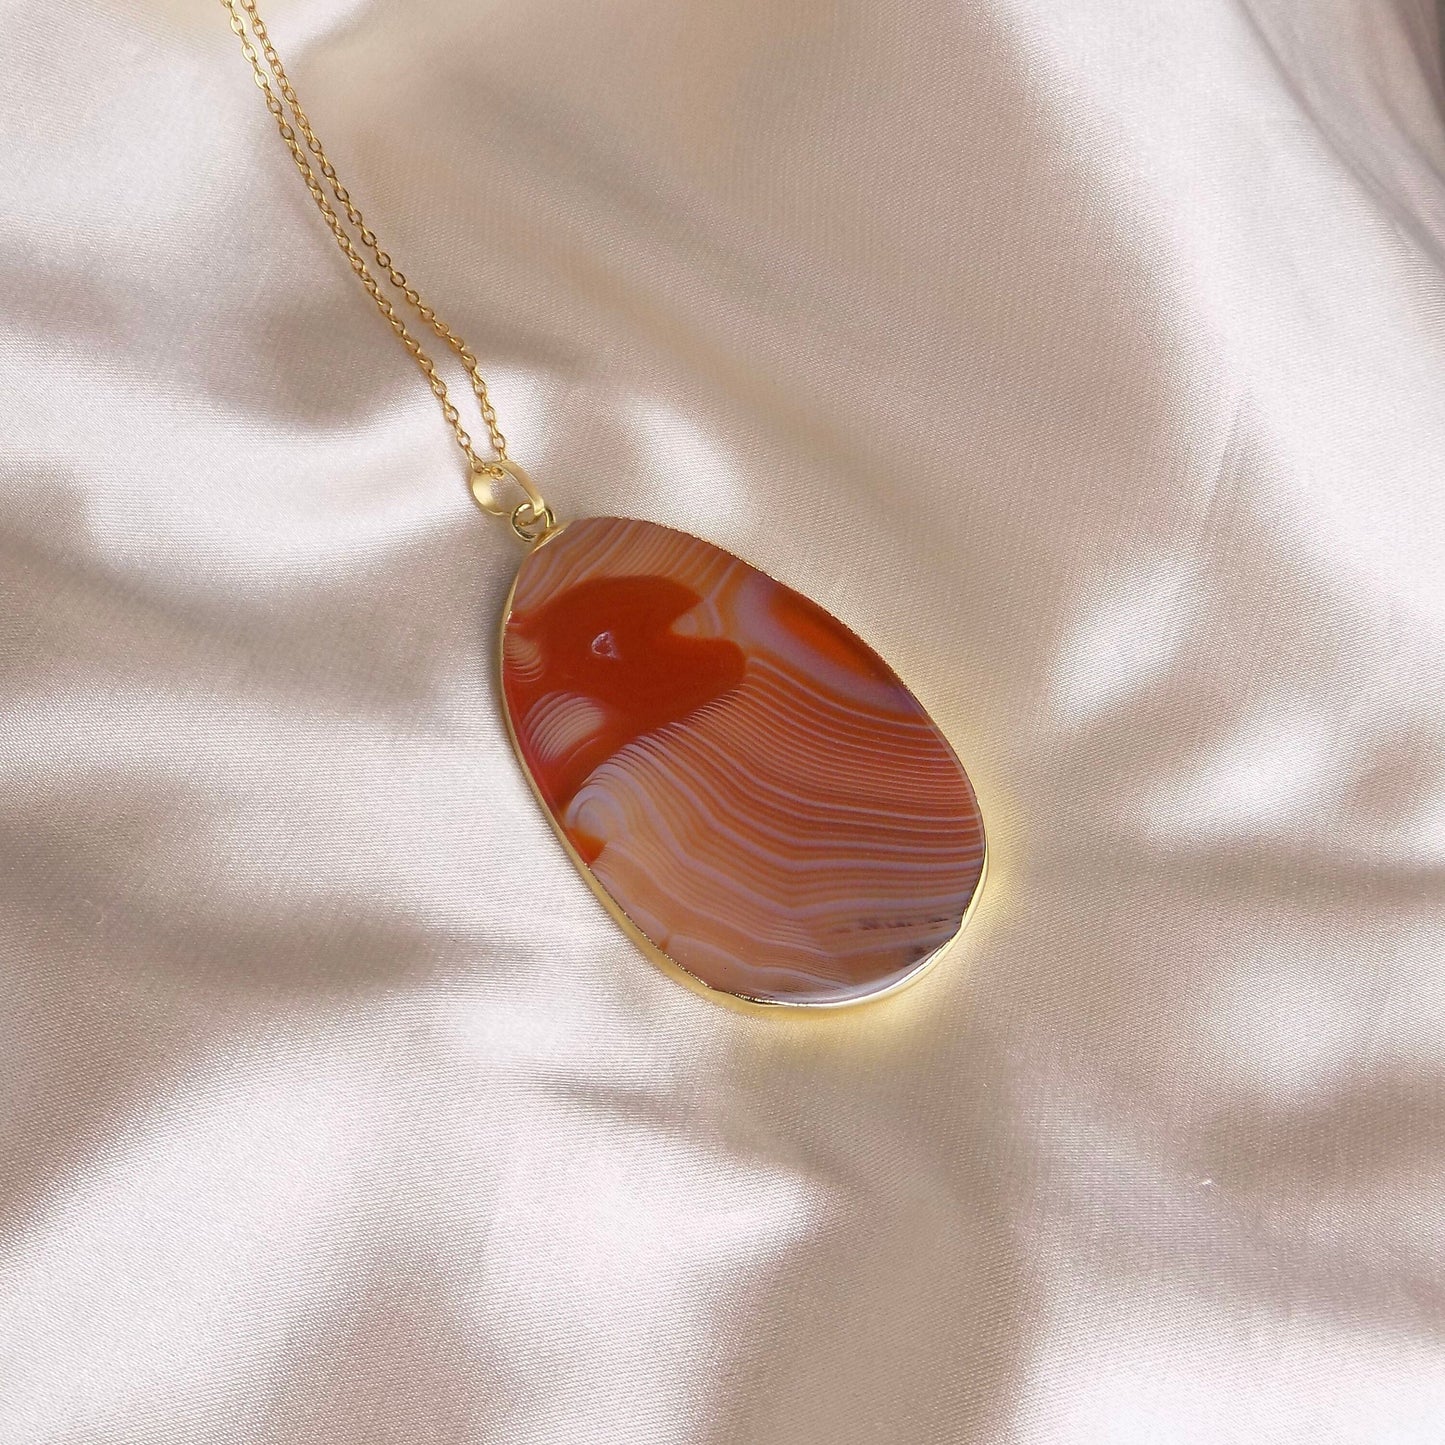 Extra Large Agate Necklace Gold, Orange Brown Agate Slice, Boho Long Layer, Gift For Mom, G15-06